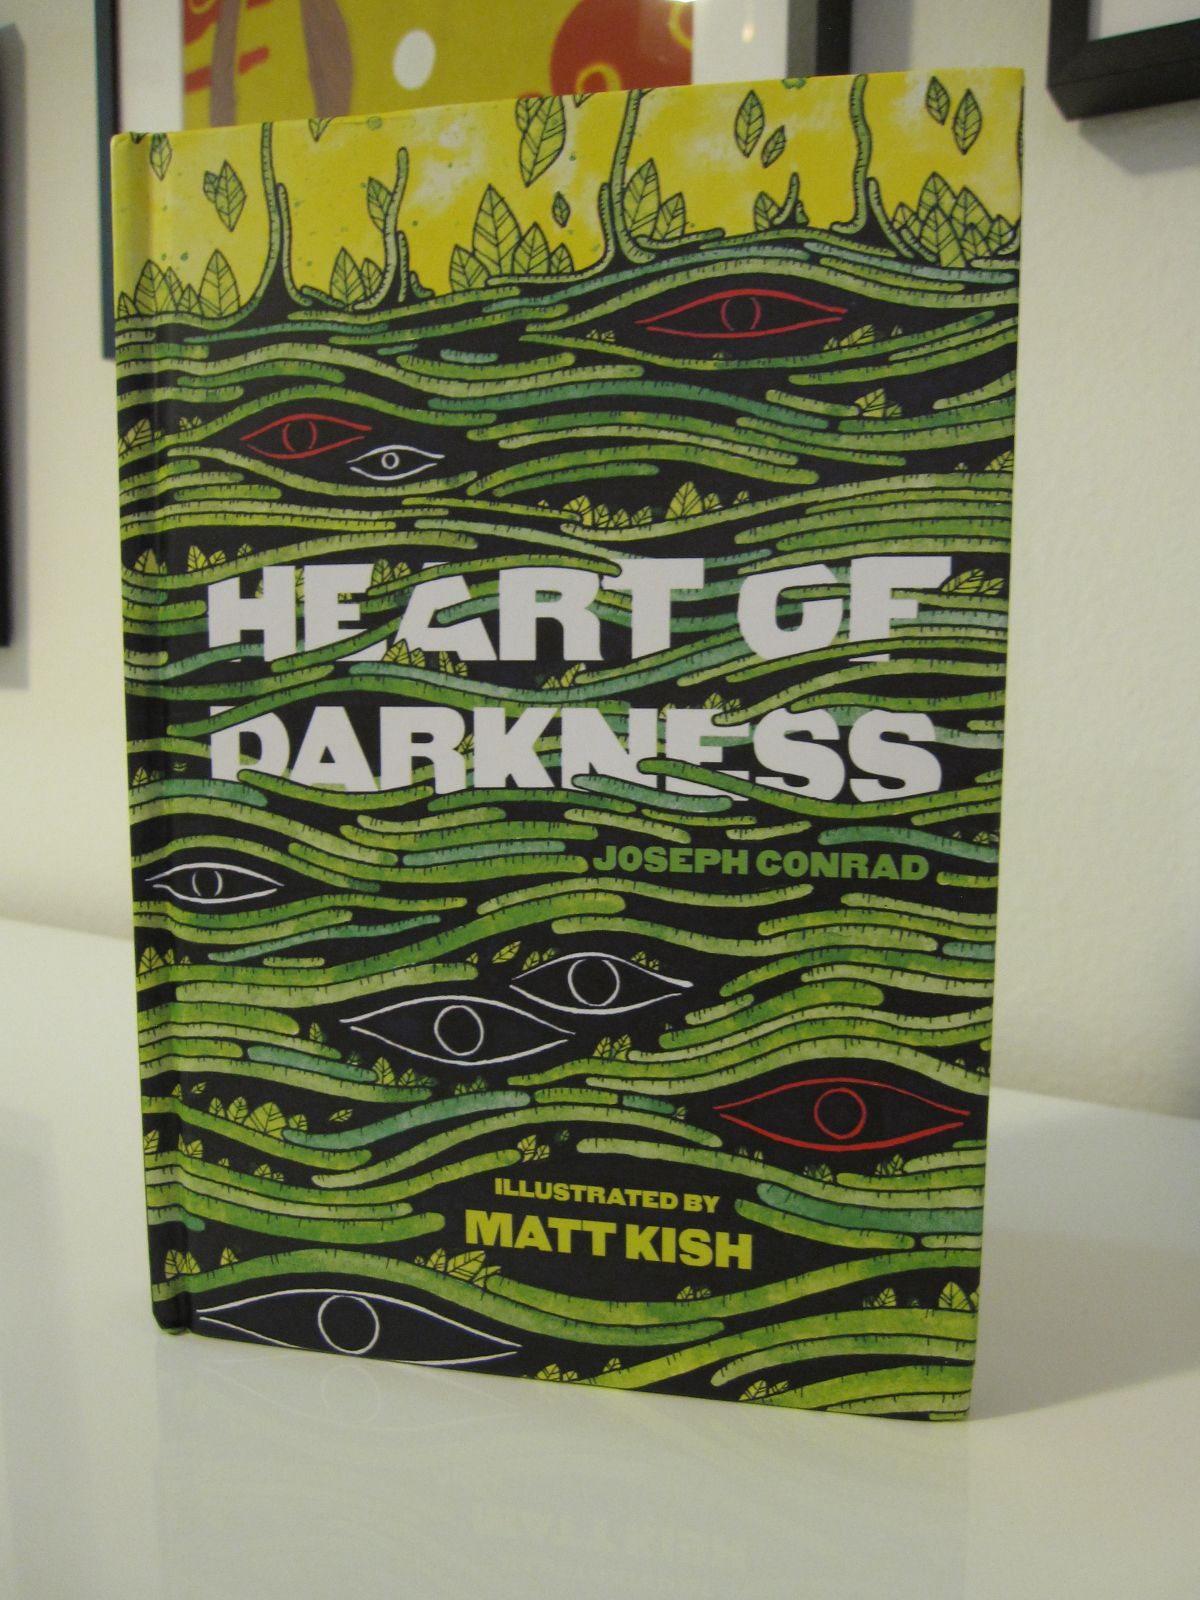 best of Of heart darkness Dick the at